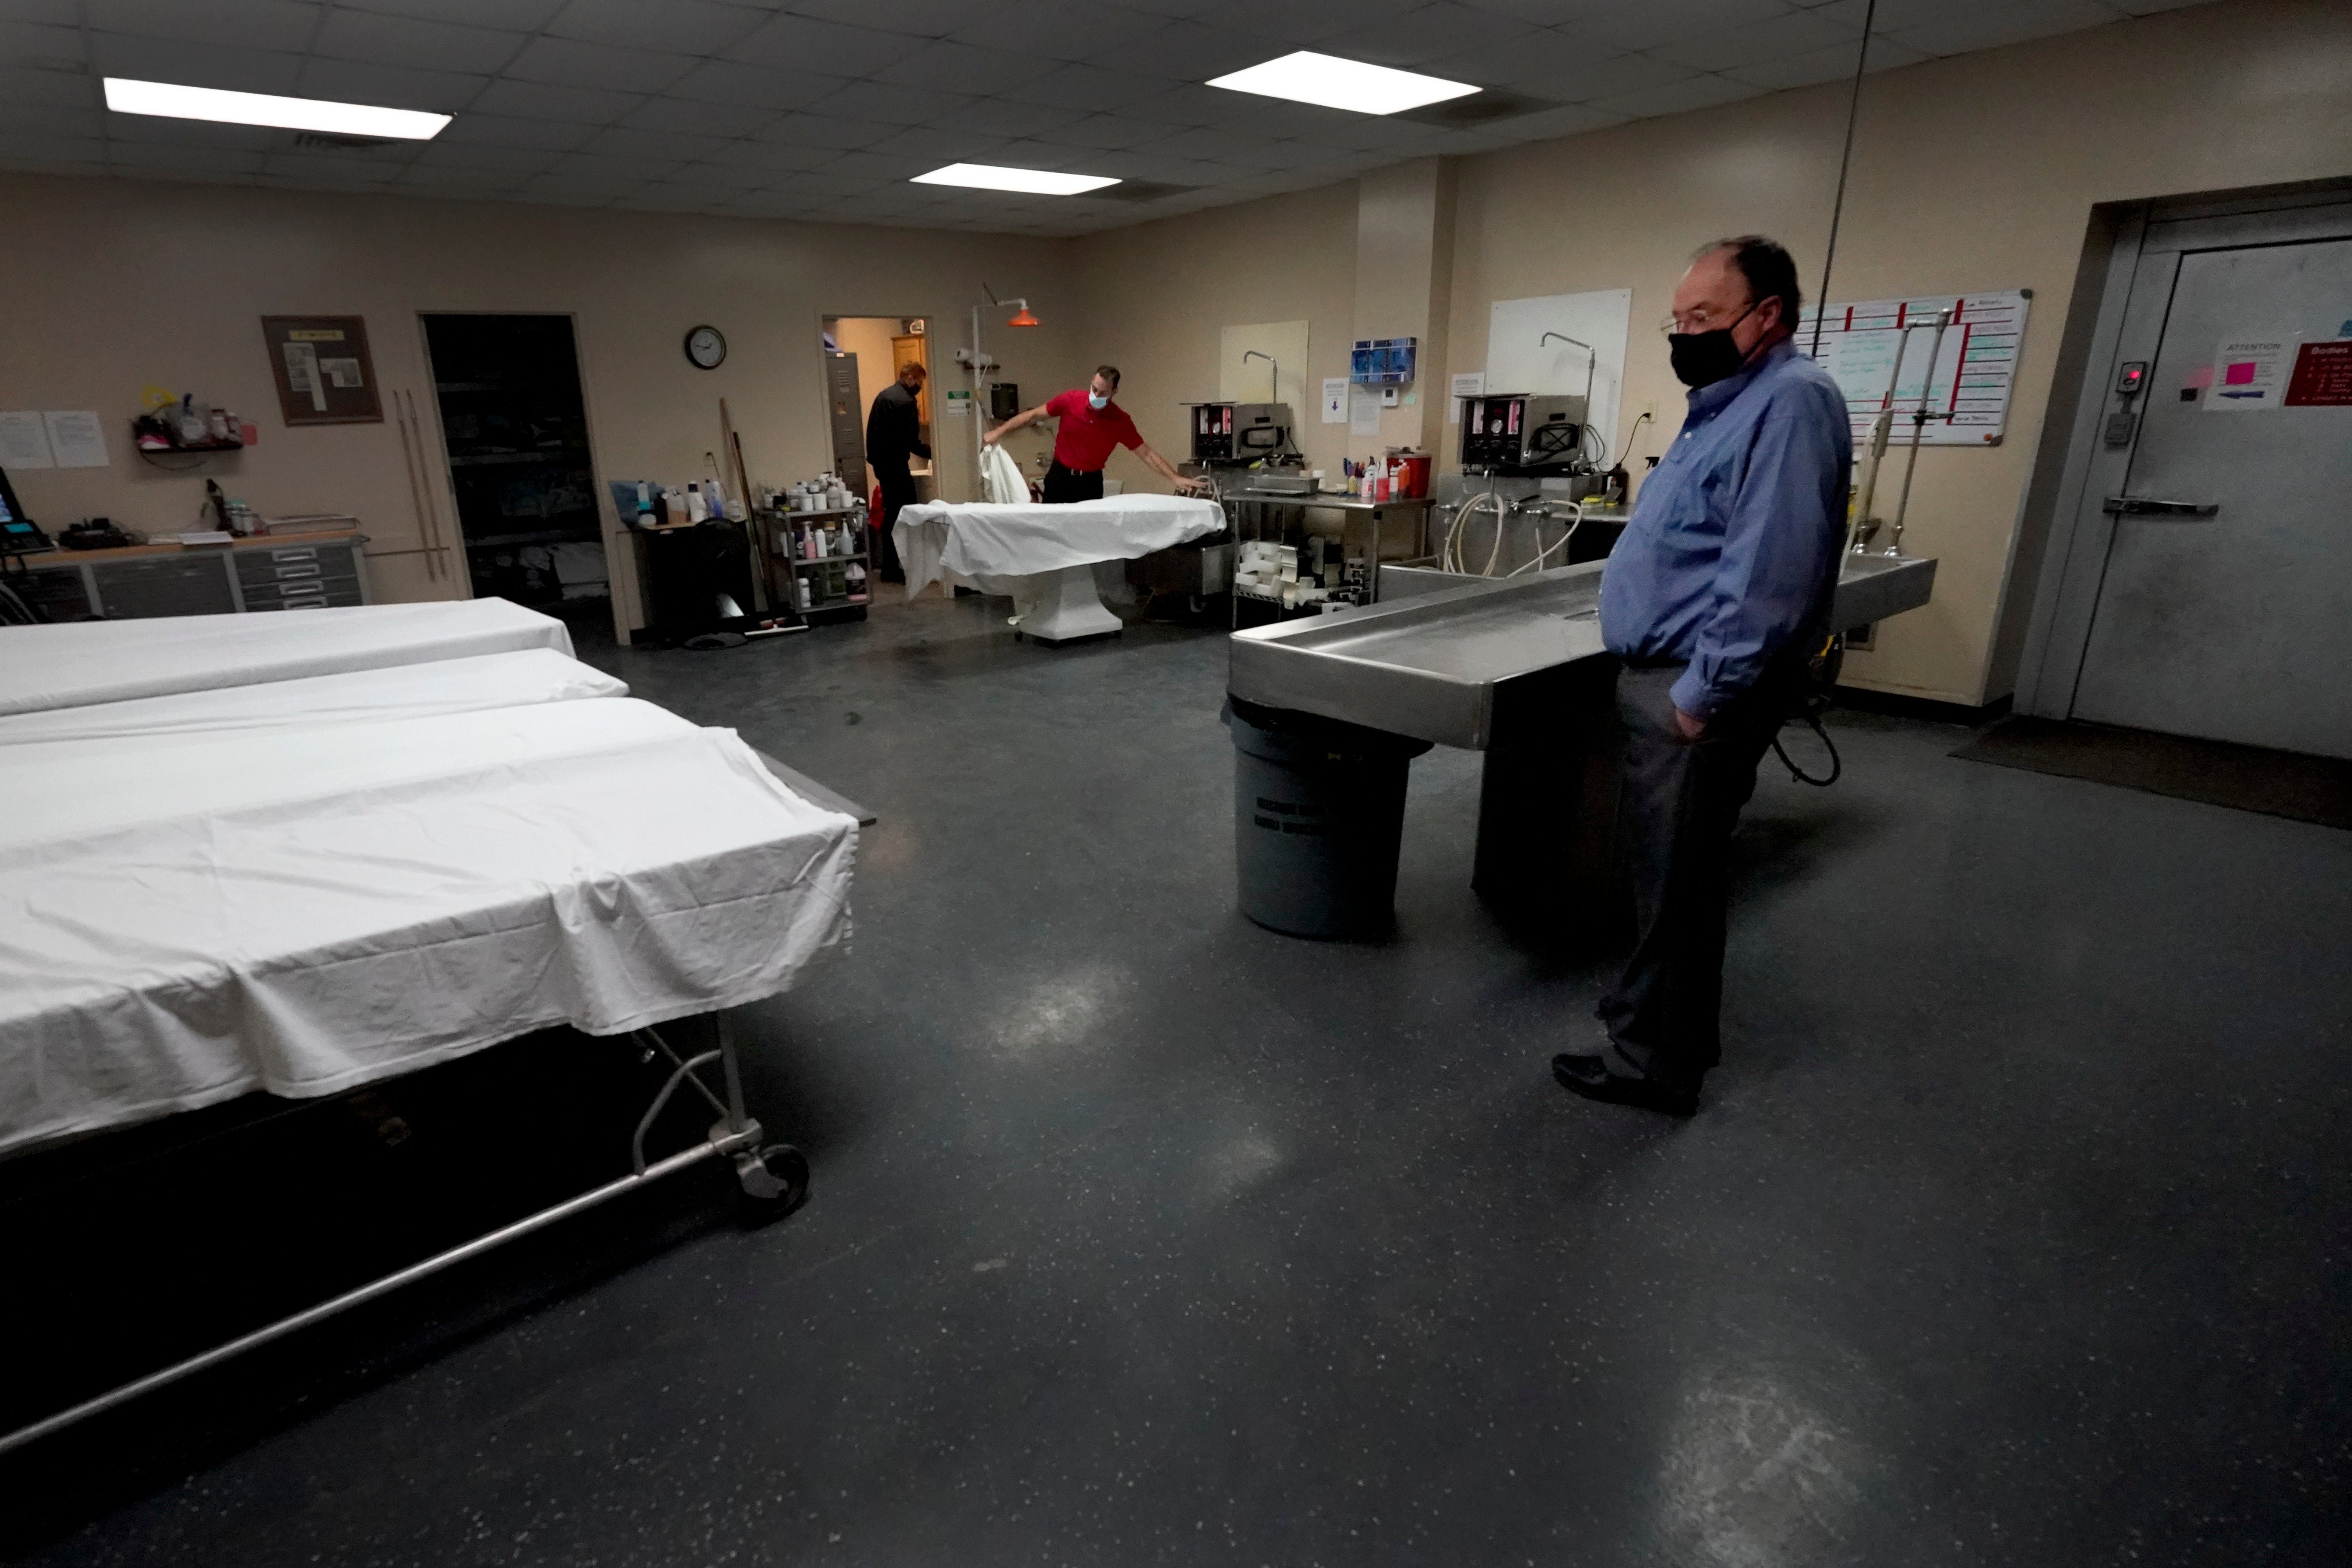 Owner Brian Simmons looks over the preparation room in mortuary as workers get ready to prepare a body Thursday, Jan. 28, 2021, in Springfield, Mo. Simmons has been making more trips to homes to pick up bodies to be cremated and embalmed since the pandemic hit. For many families, home is a better setting than the terrifying scenario of saying farewell to loved ones behind glass or during video calls amid the coronavirus pandemic.